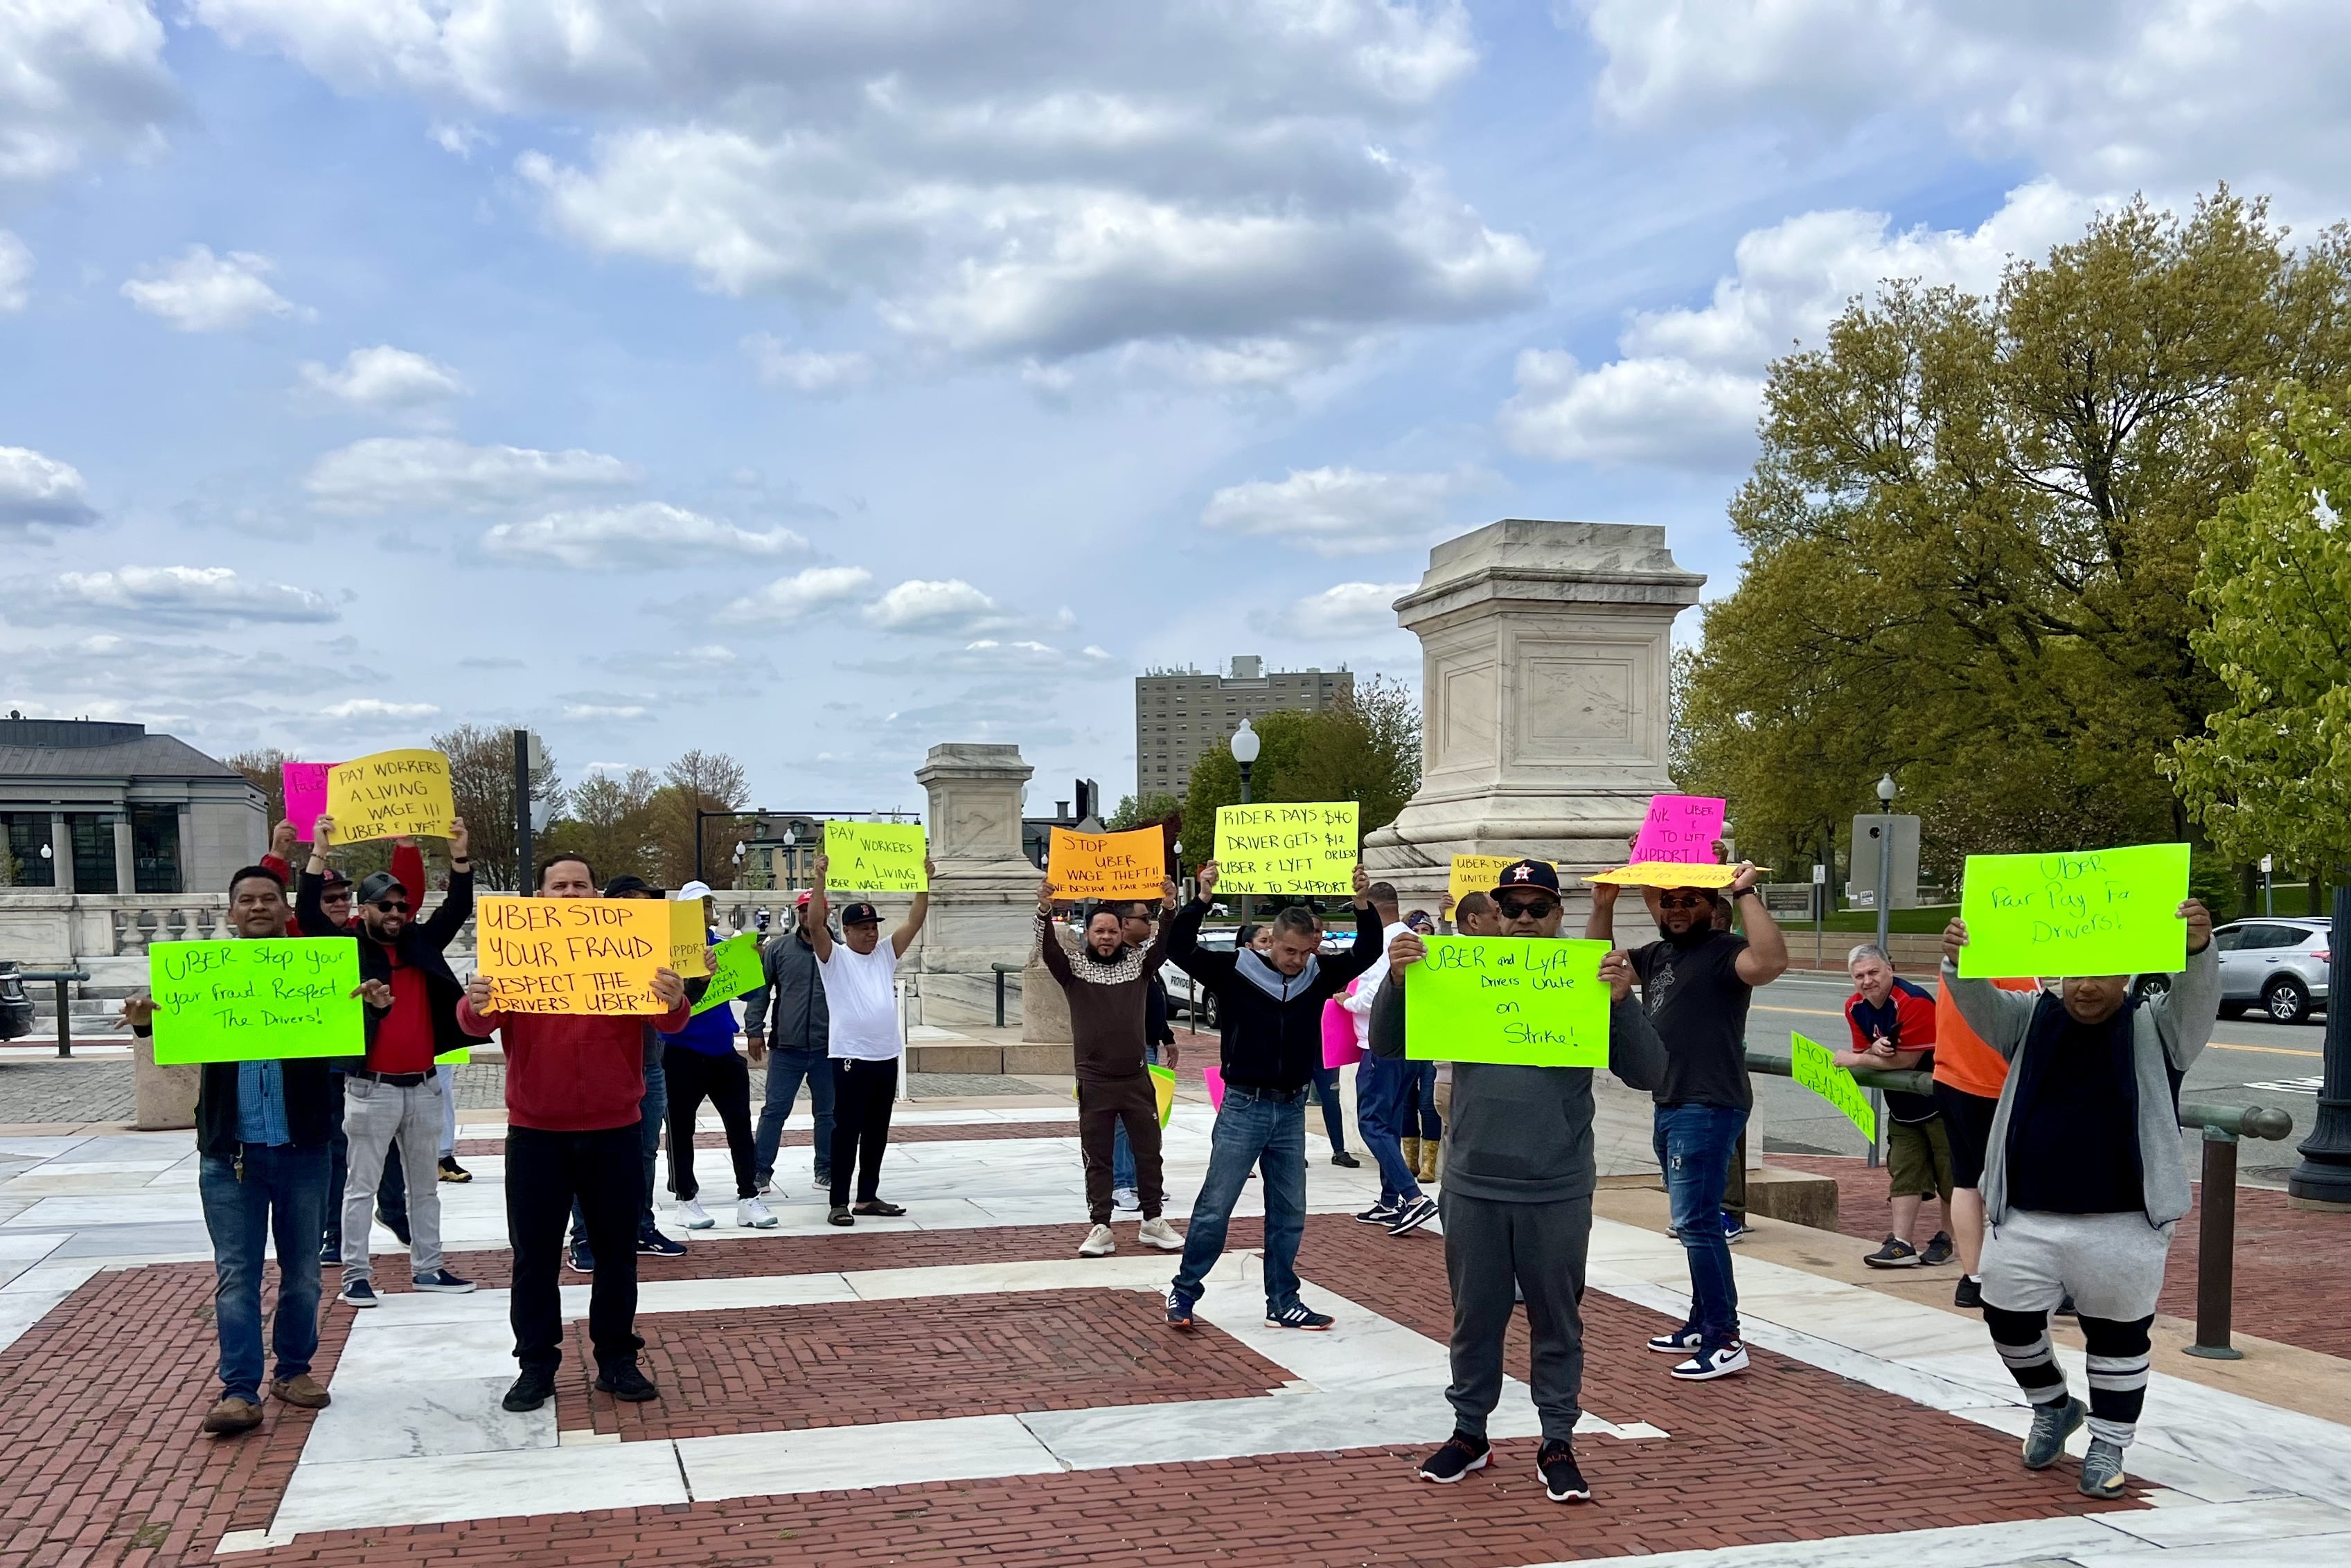 Rhode Island: Uber and Lyft Drivers Strike in Rhode Island for Better Pay and Working Conditions